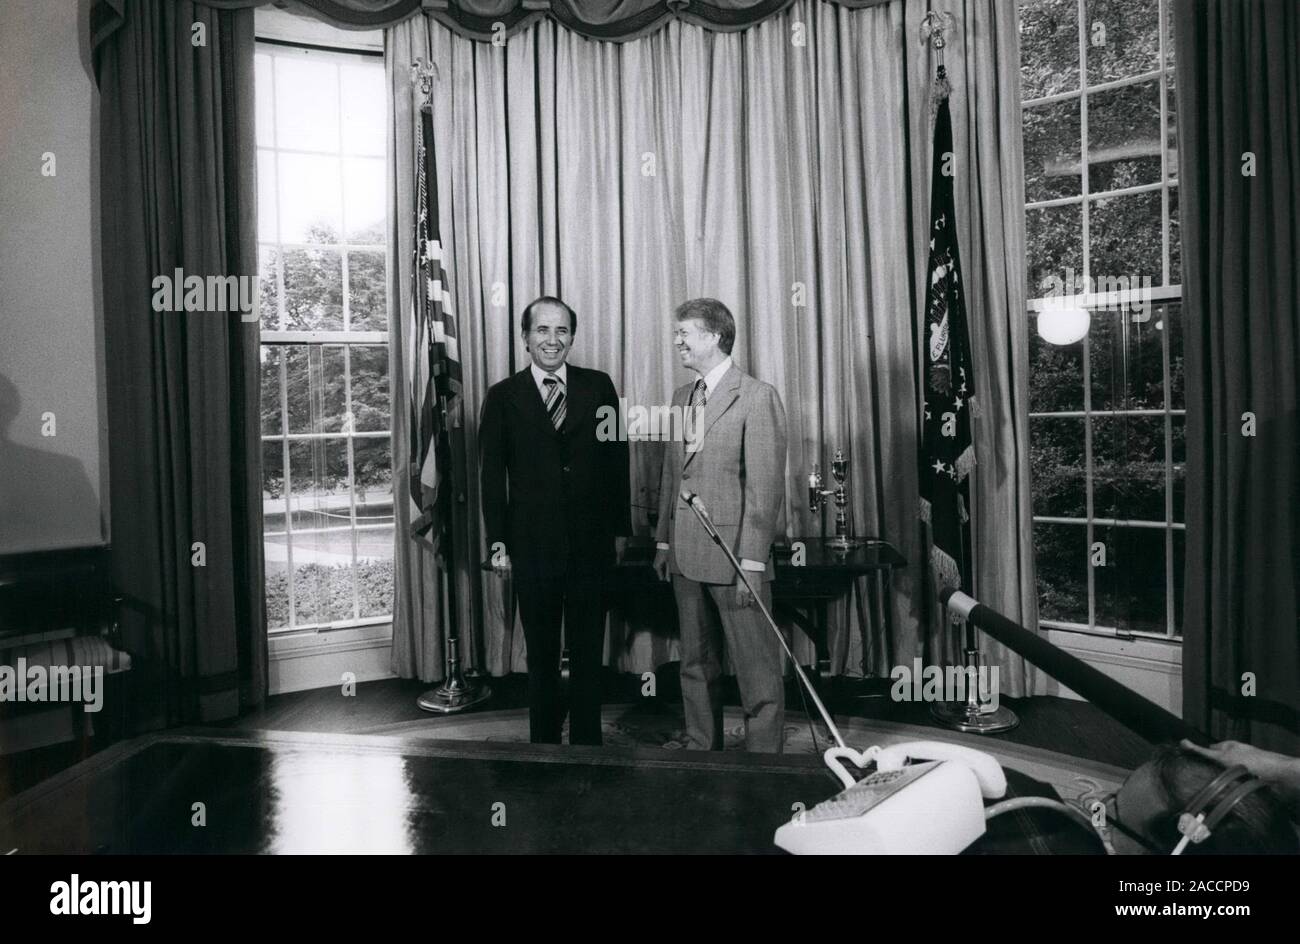 Sep. 7, 1977 - Washington DC, USA - President JIMMY CARTER, right, shares a laugh with President CARLOS ANDRES PEREZ of Venezuela at the Oval Office in the White House. Today Carter of signed the new Panama Canal Treaties, The Torrijos-Carter Treaties, which will transfer control of the Panama Canal to Panama after 1999. (Credit Image: © Keystone Press Agency/Keystone USA via ZUMAPRESS.com) Stock Photo